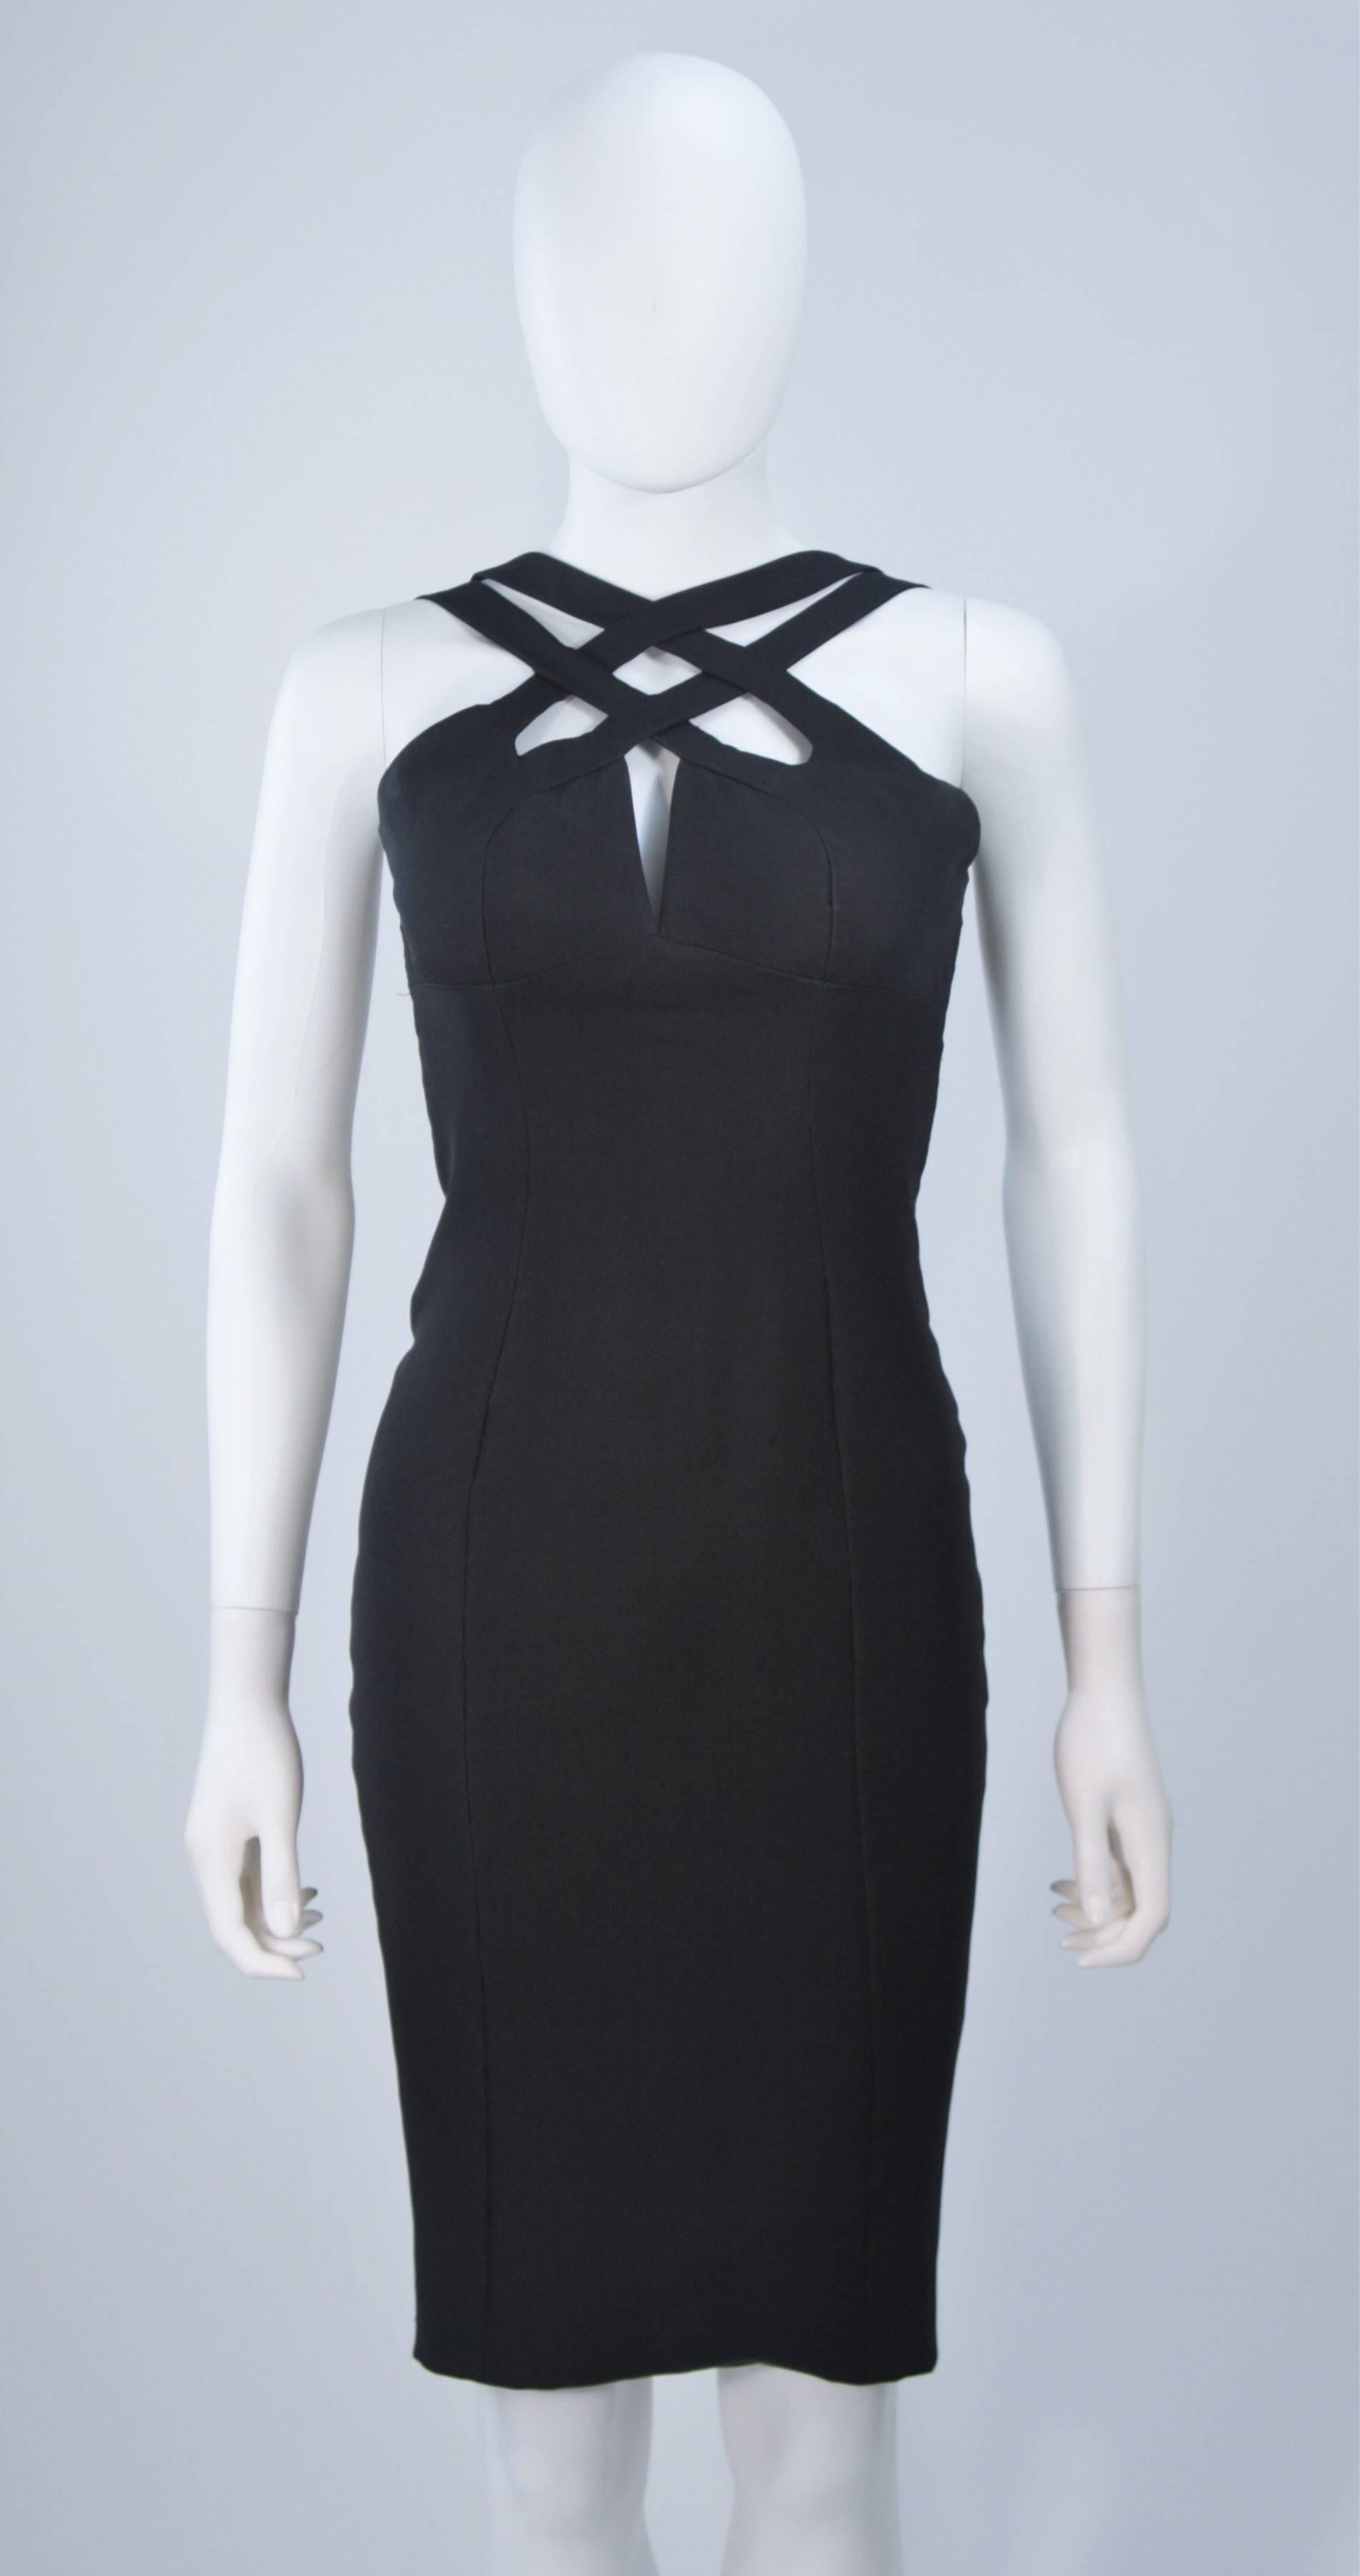 Black ELIZABETH MASON COUTURE Silk Criss Cross Cocktail Dress Made to Measure For Sale